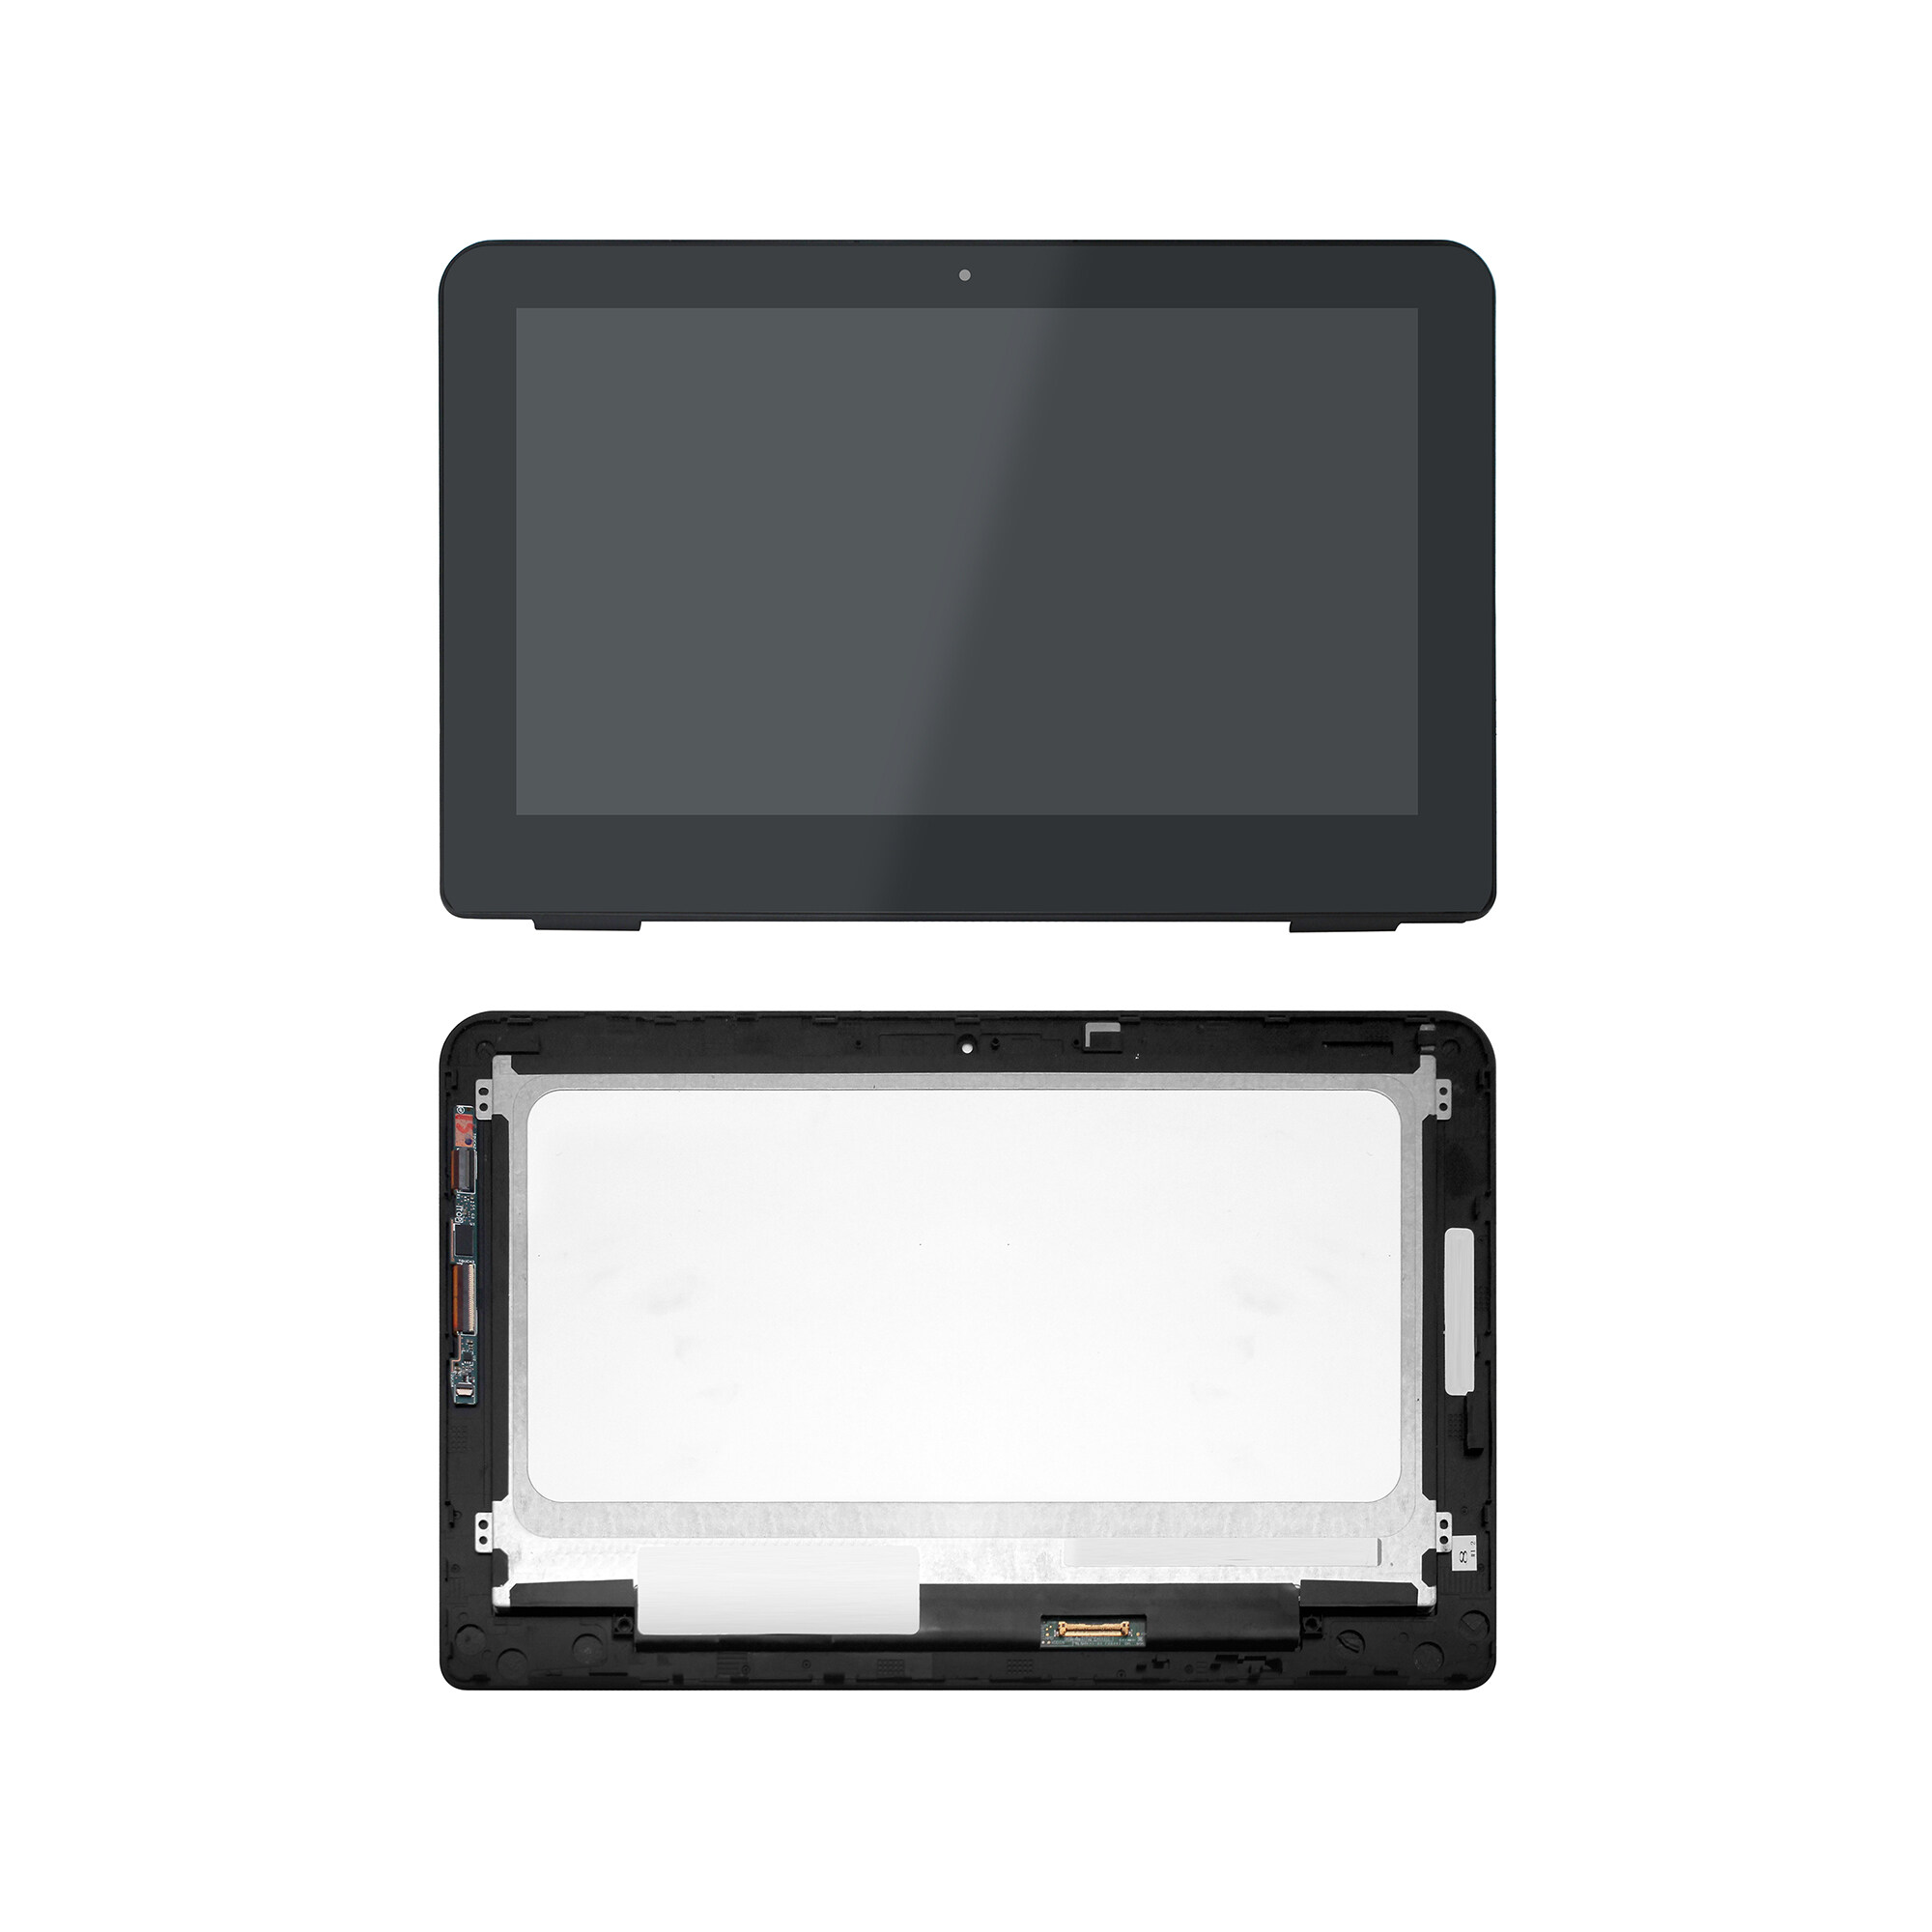 11.6" LED LCD Touch Screen Dispaly Assembly For HP Pavilion X360 11-K Series